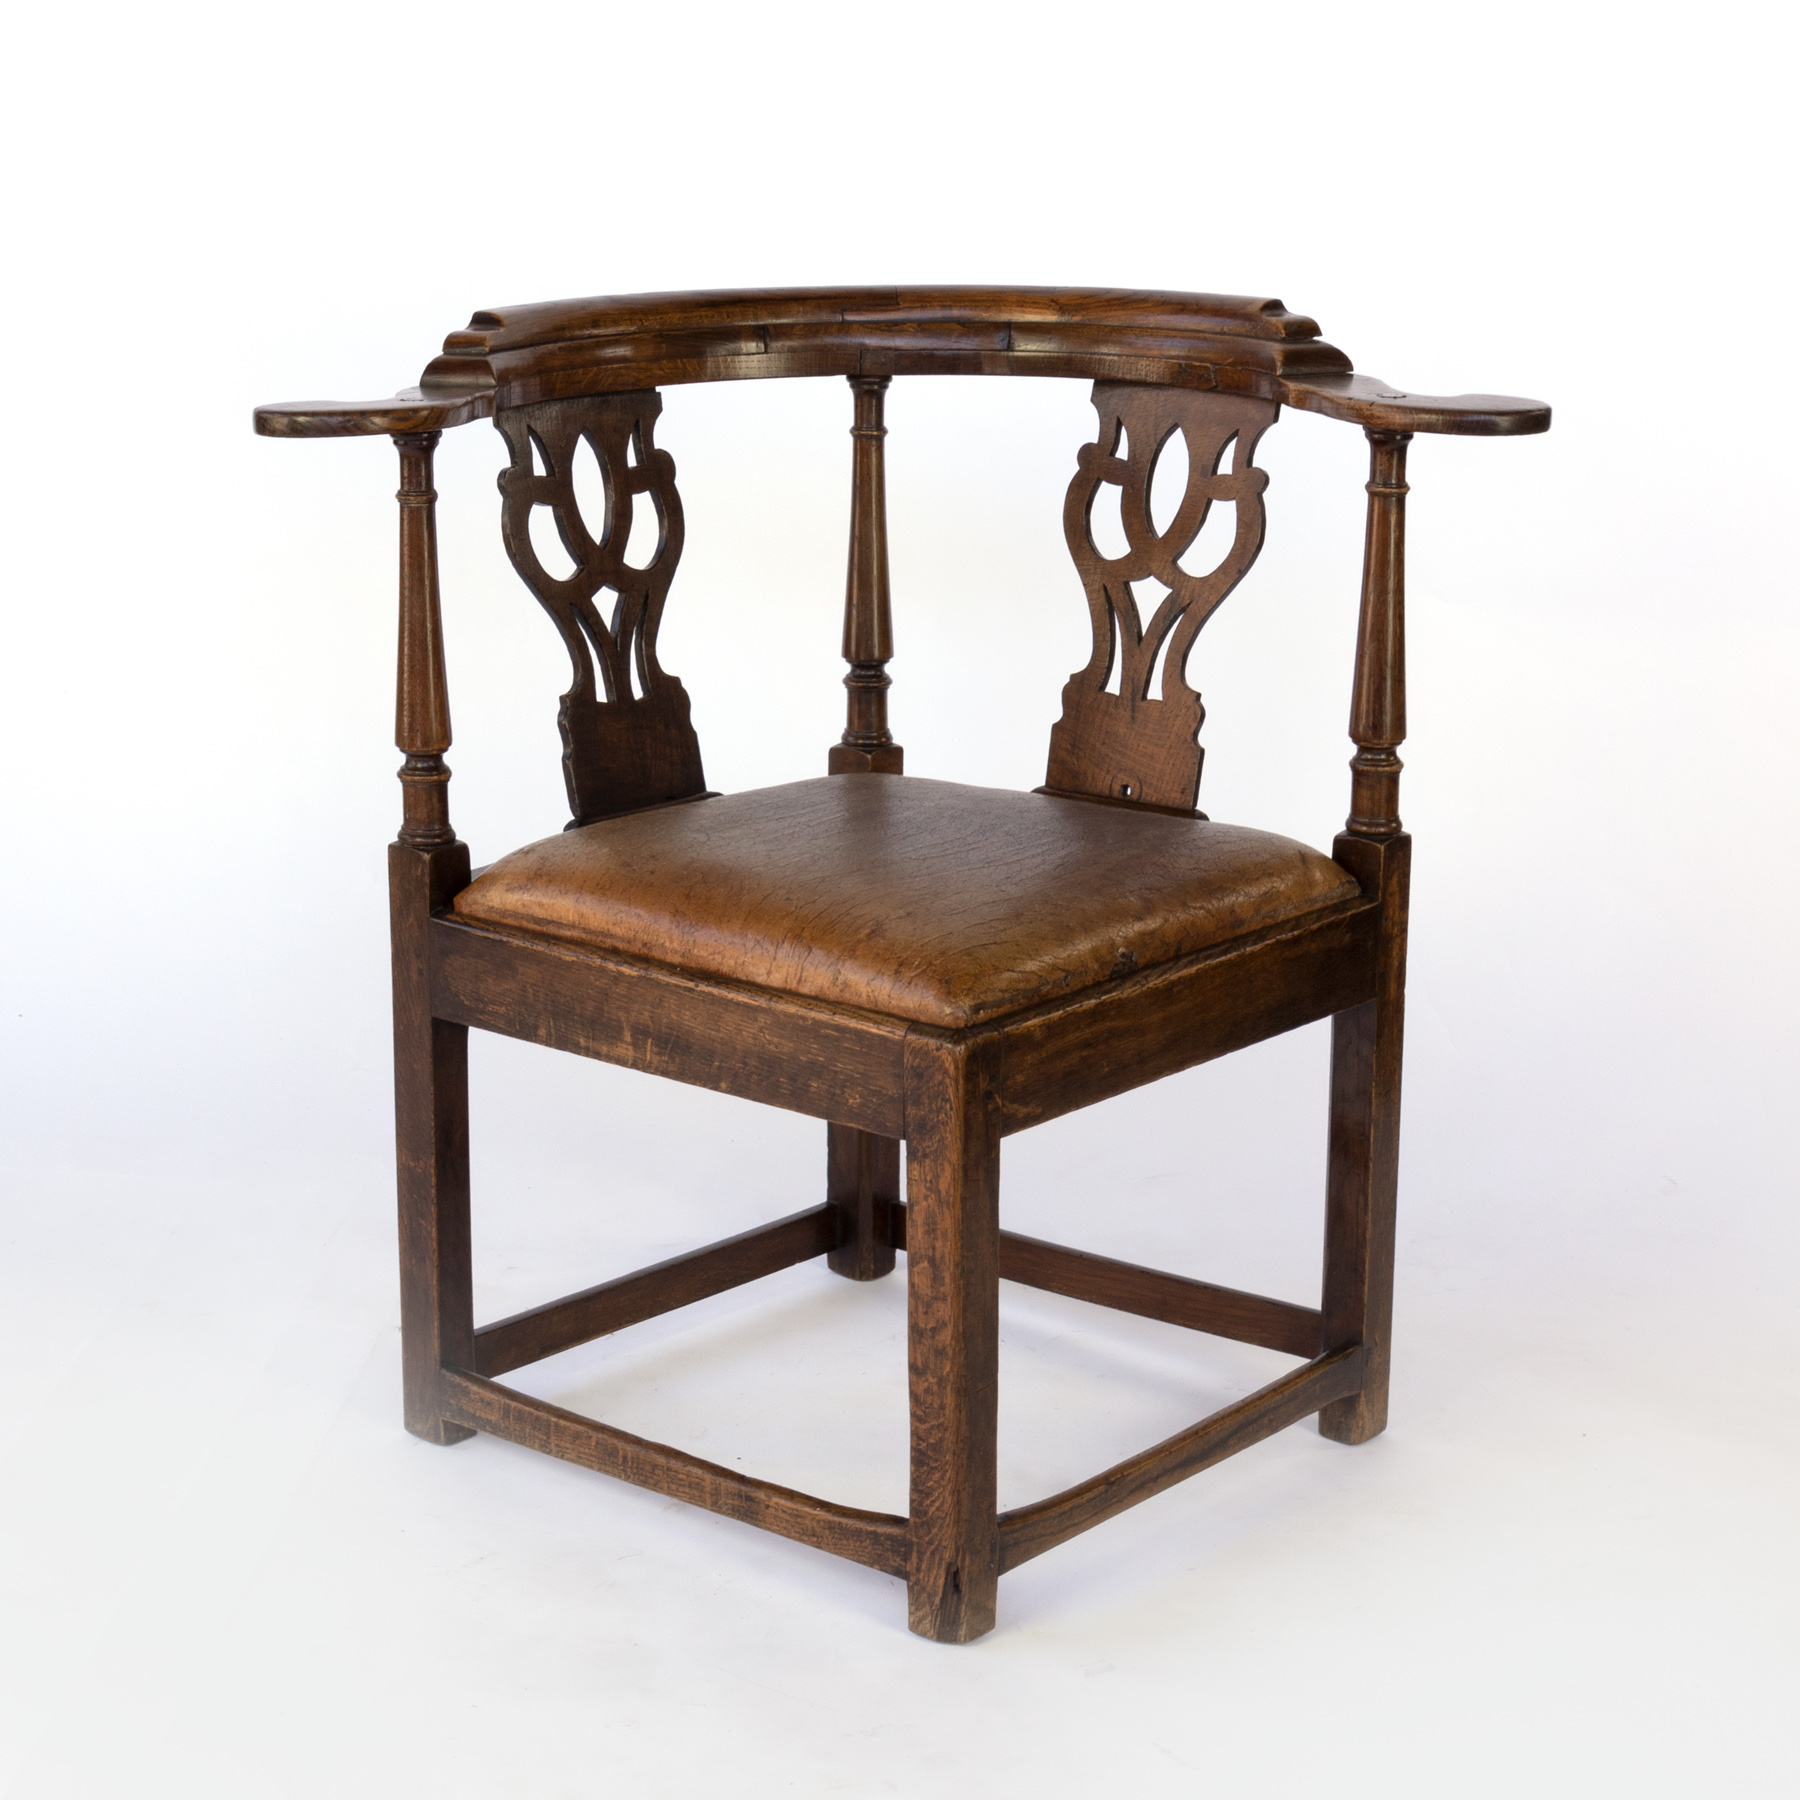 Chippendale Period Roundabout Corner Chair English Circa 1760 415 355 1690,Sauteed Mushrooms Chinese Style